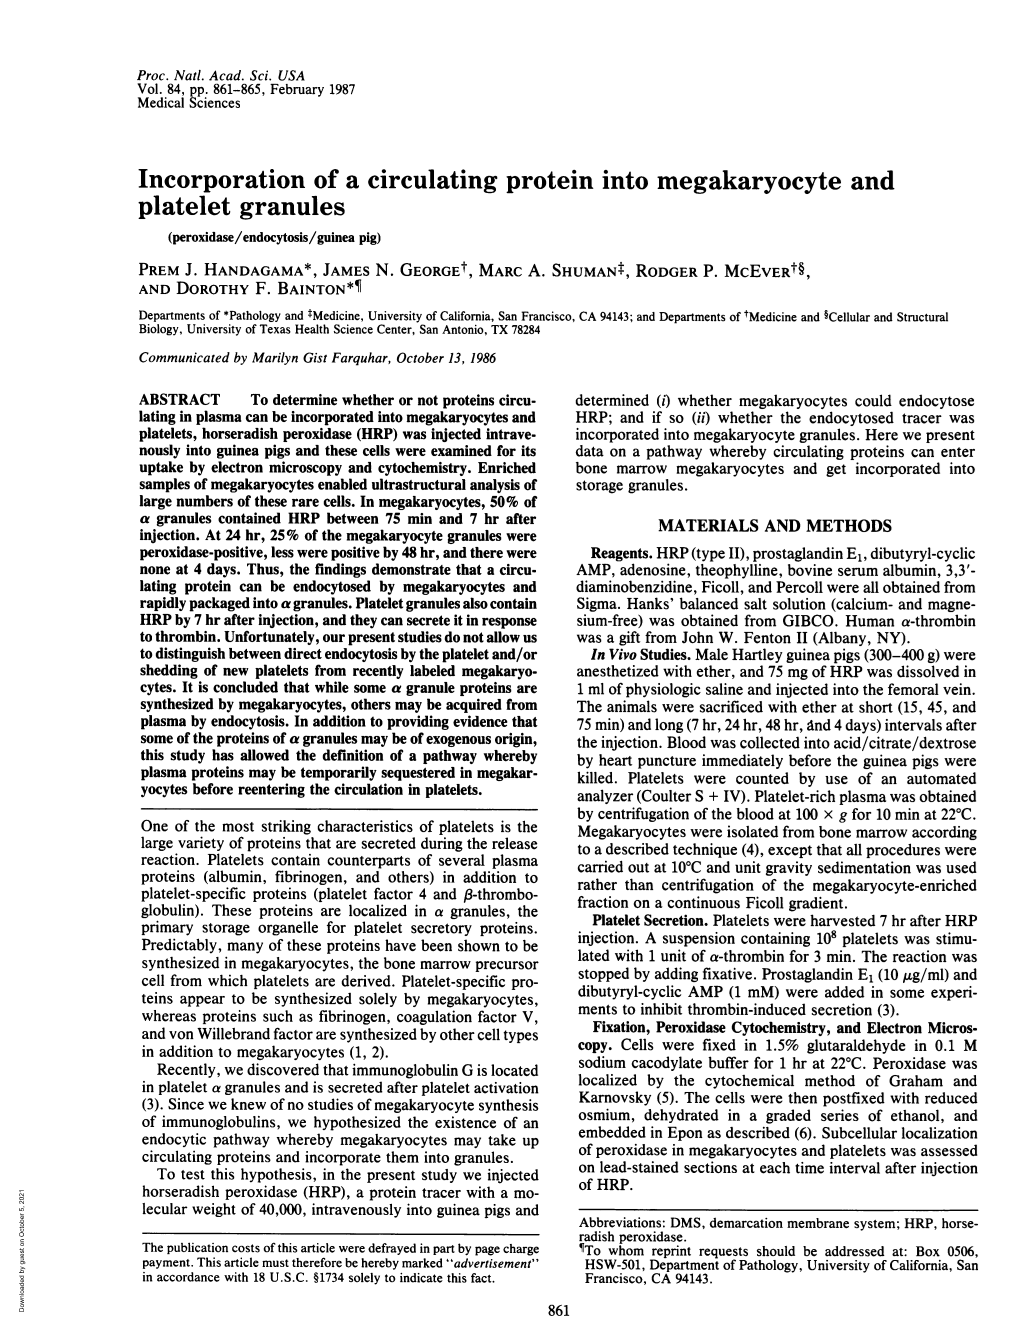 Incorporation of a Circulating Protein Into Megakaryocyte and Platelet Granules (Peroxidase/Endocytosis/Guinea Pig) PREM J